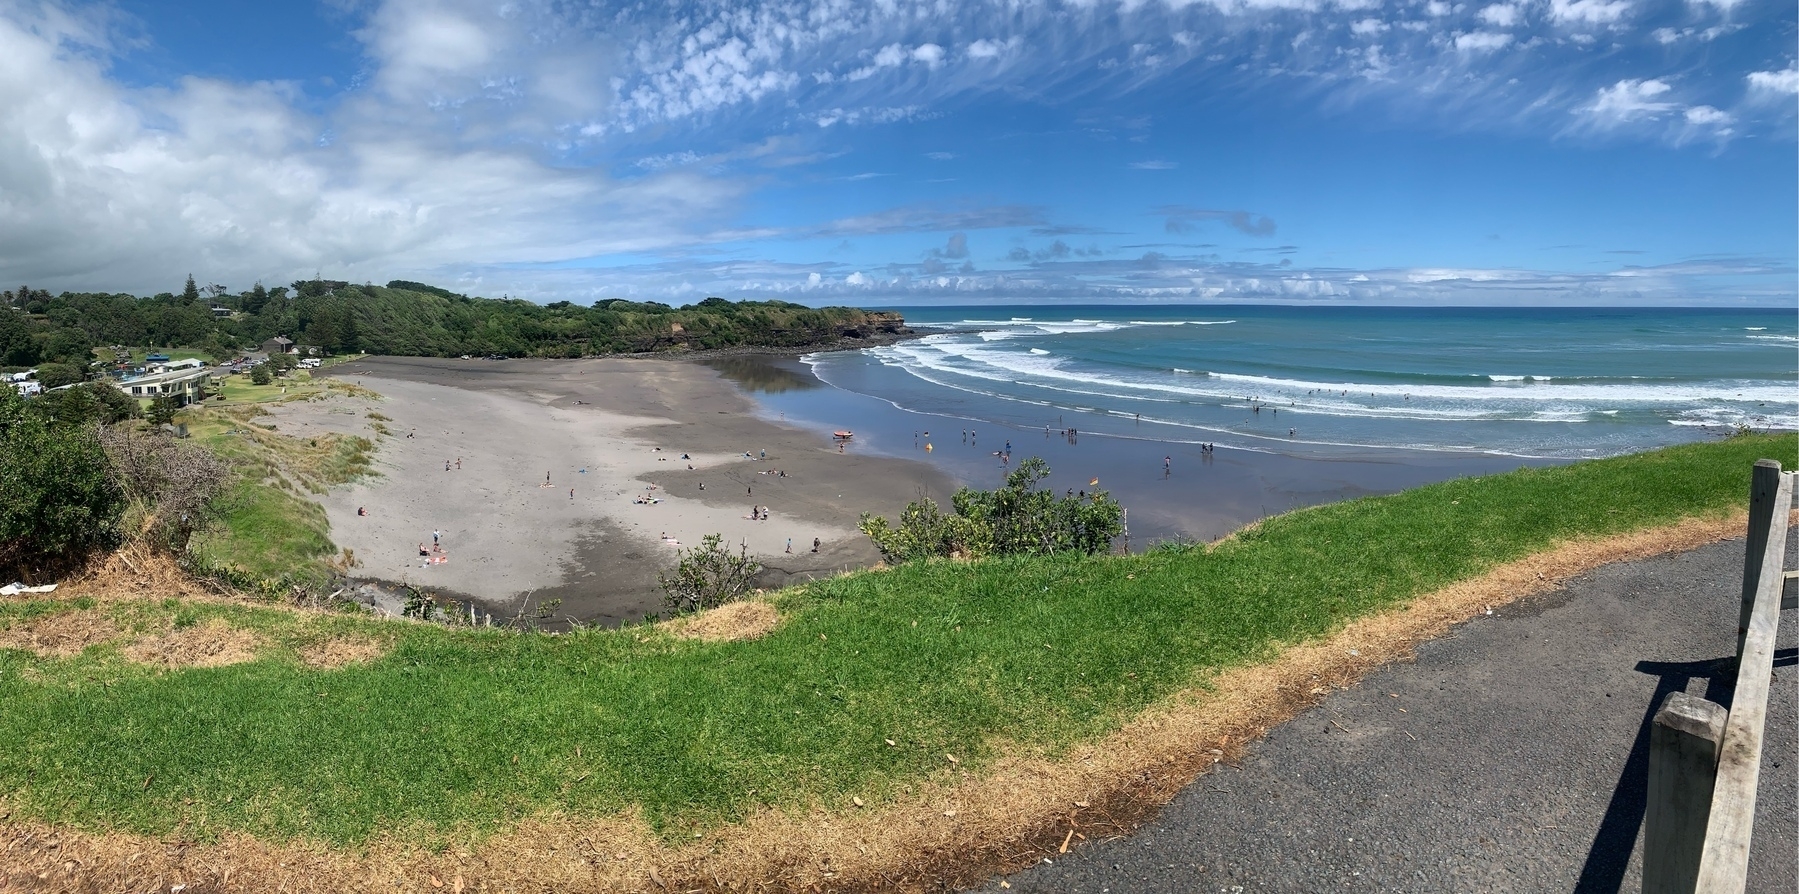 Ōpunake beach from a walkway on the cliffs on its west side